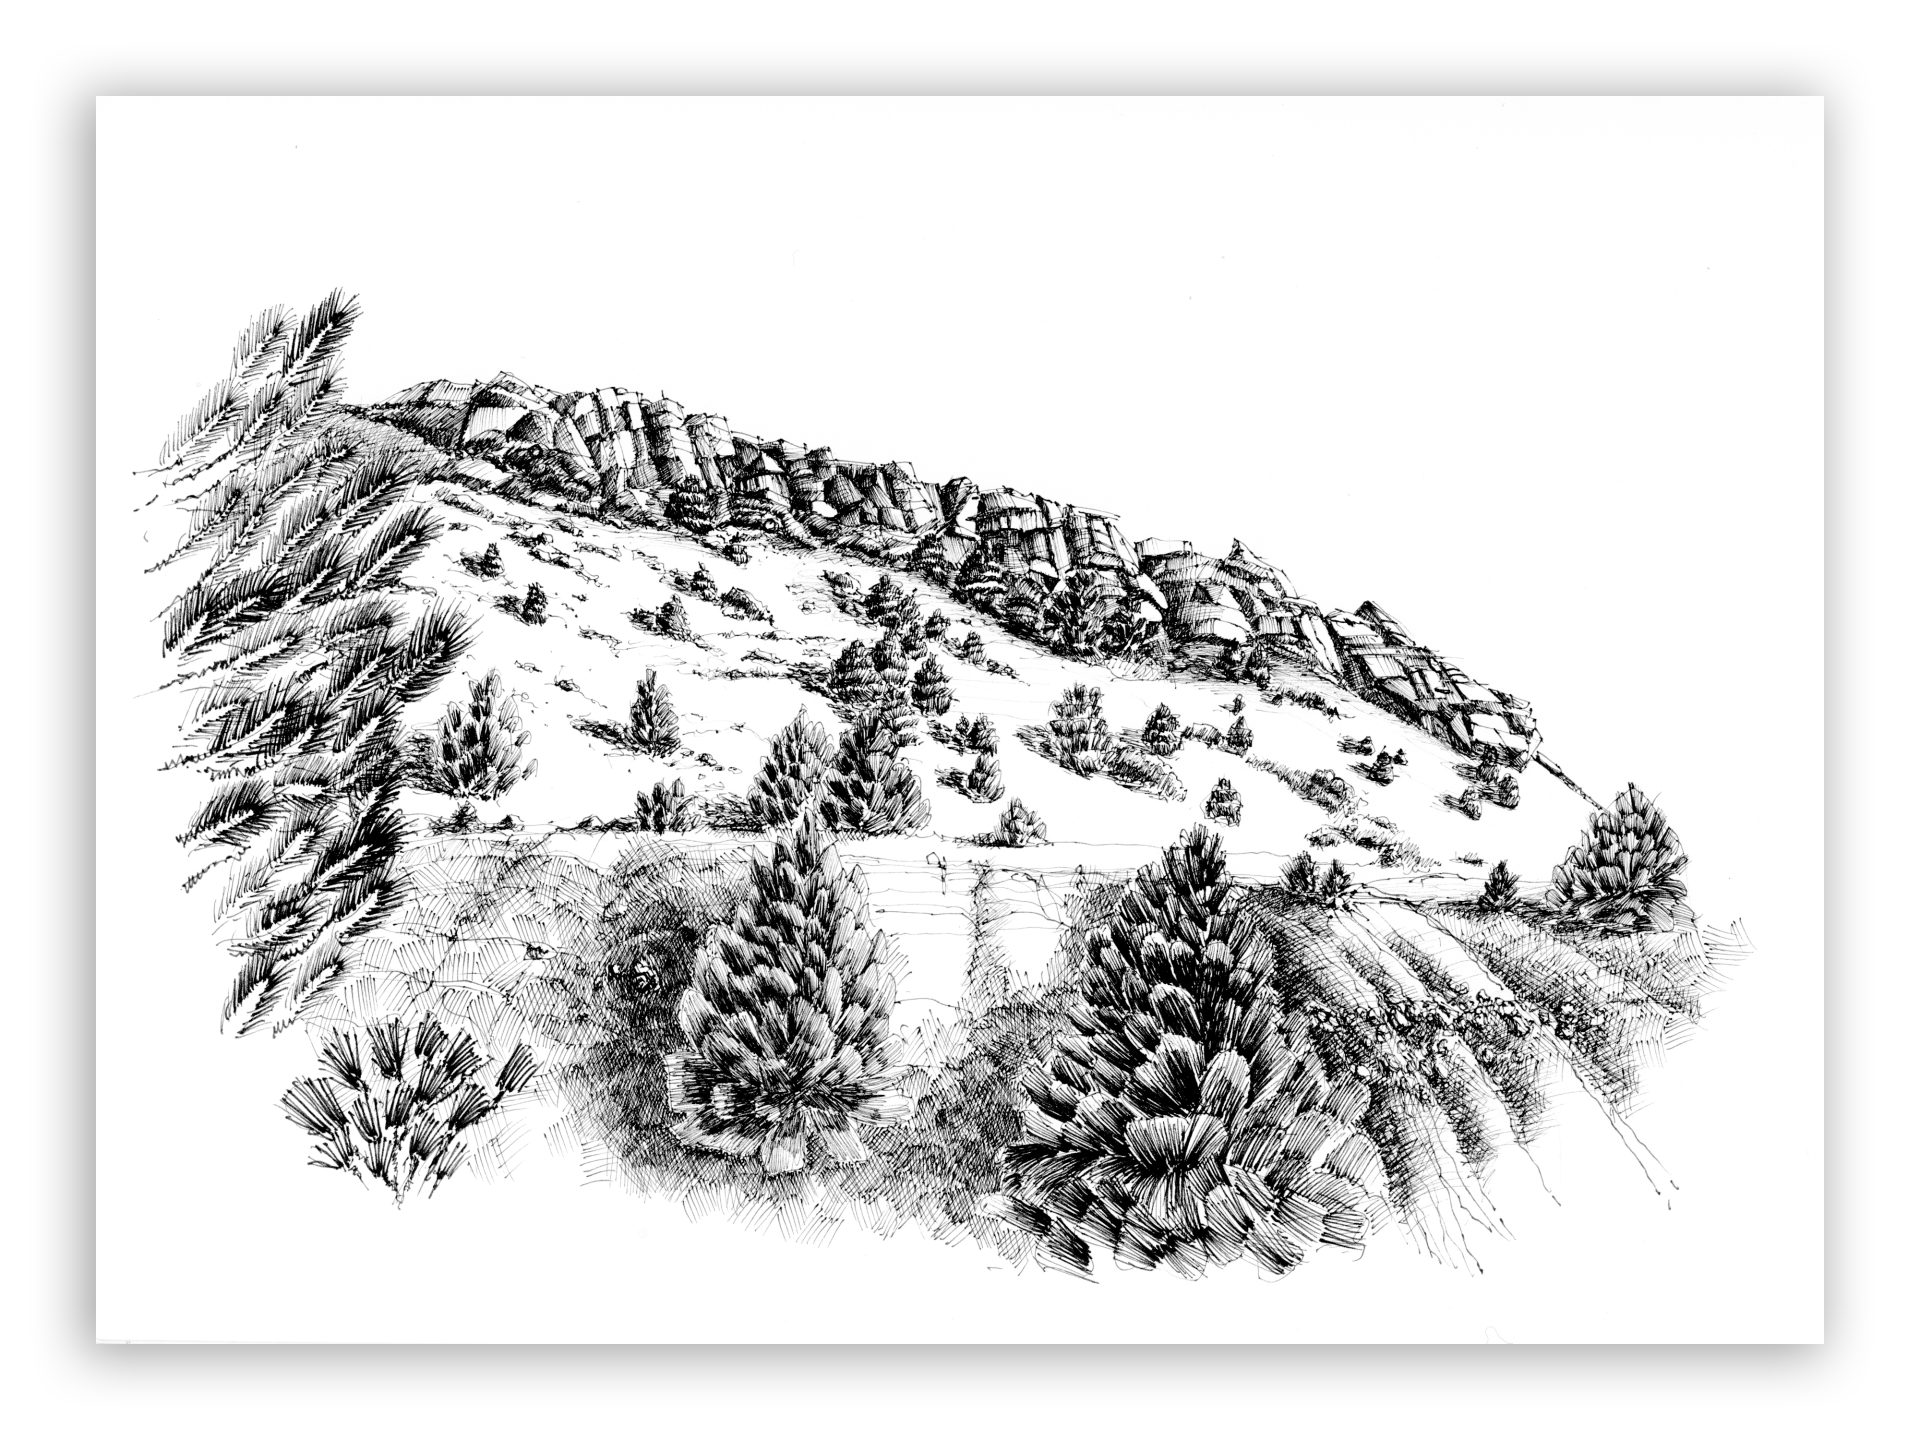 ink drawing (first version) of the goodhope mine site, rosita hills, co